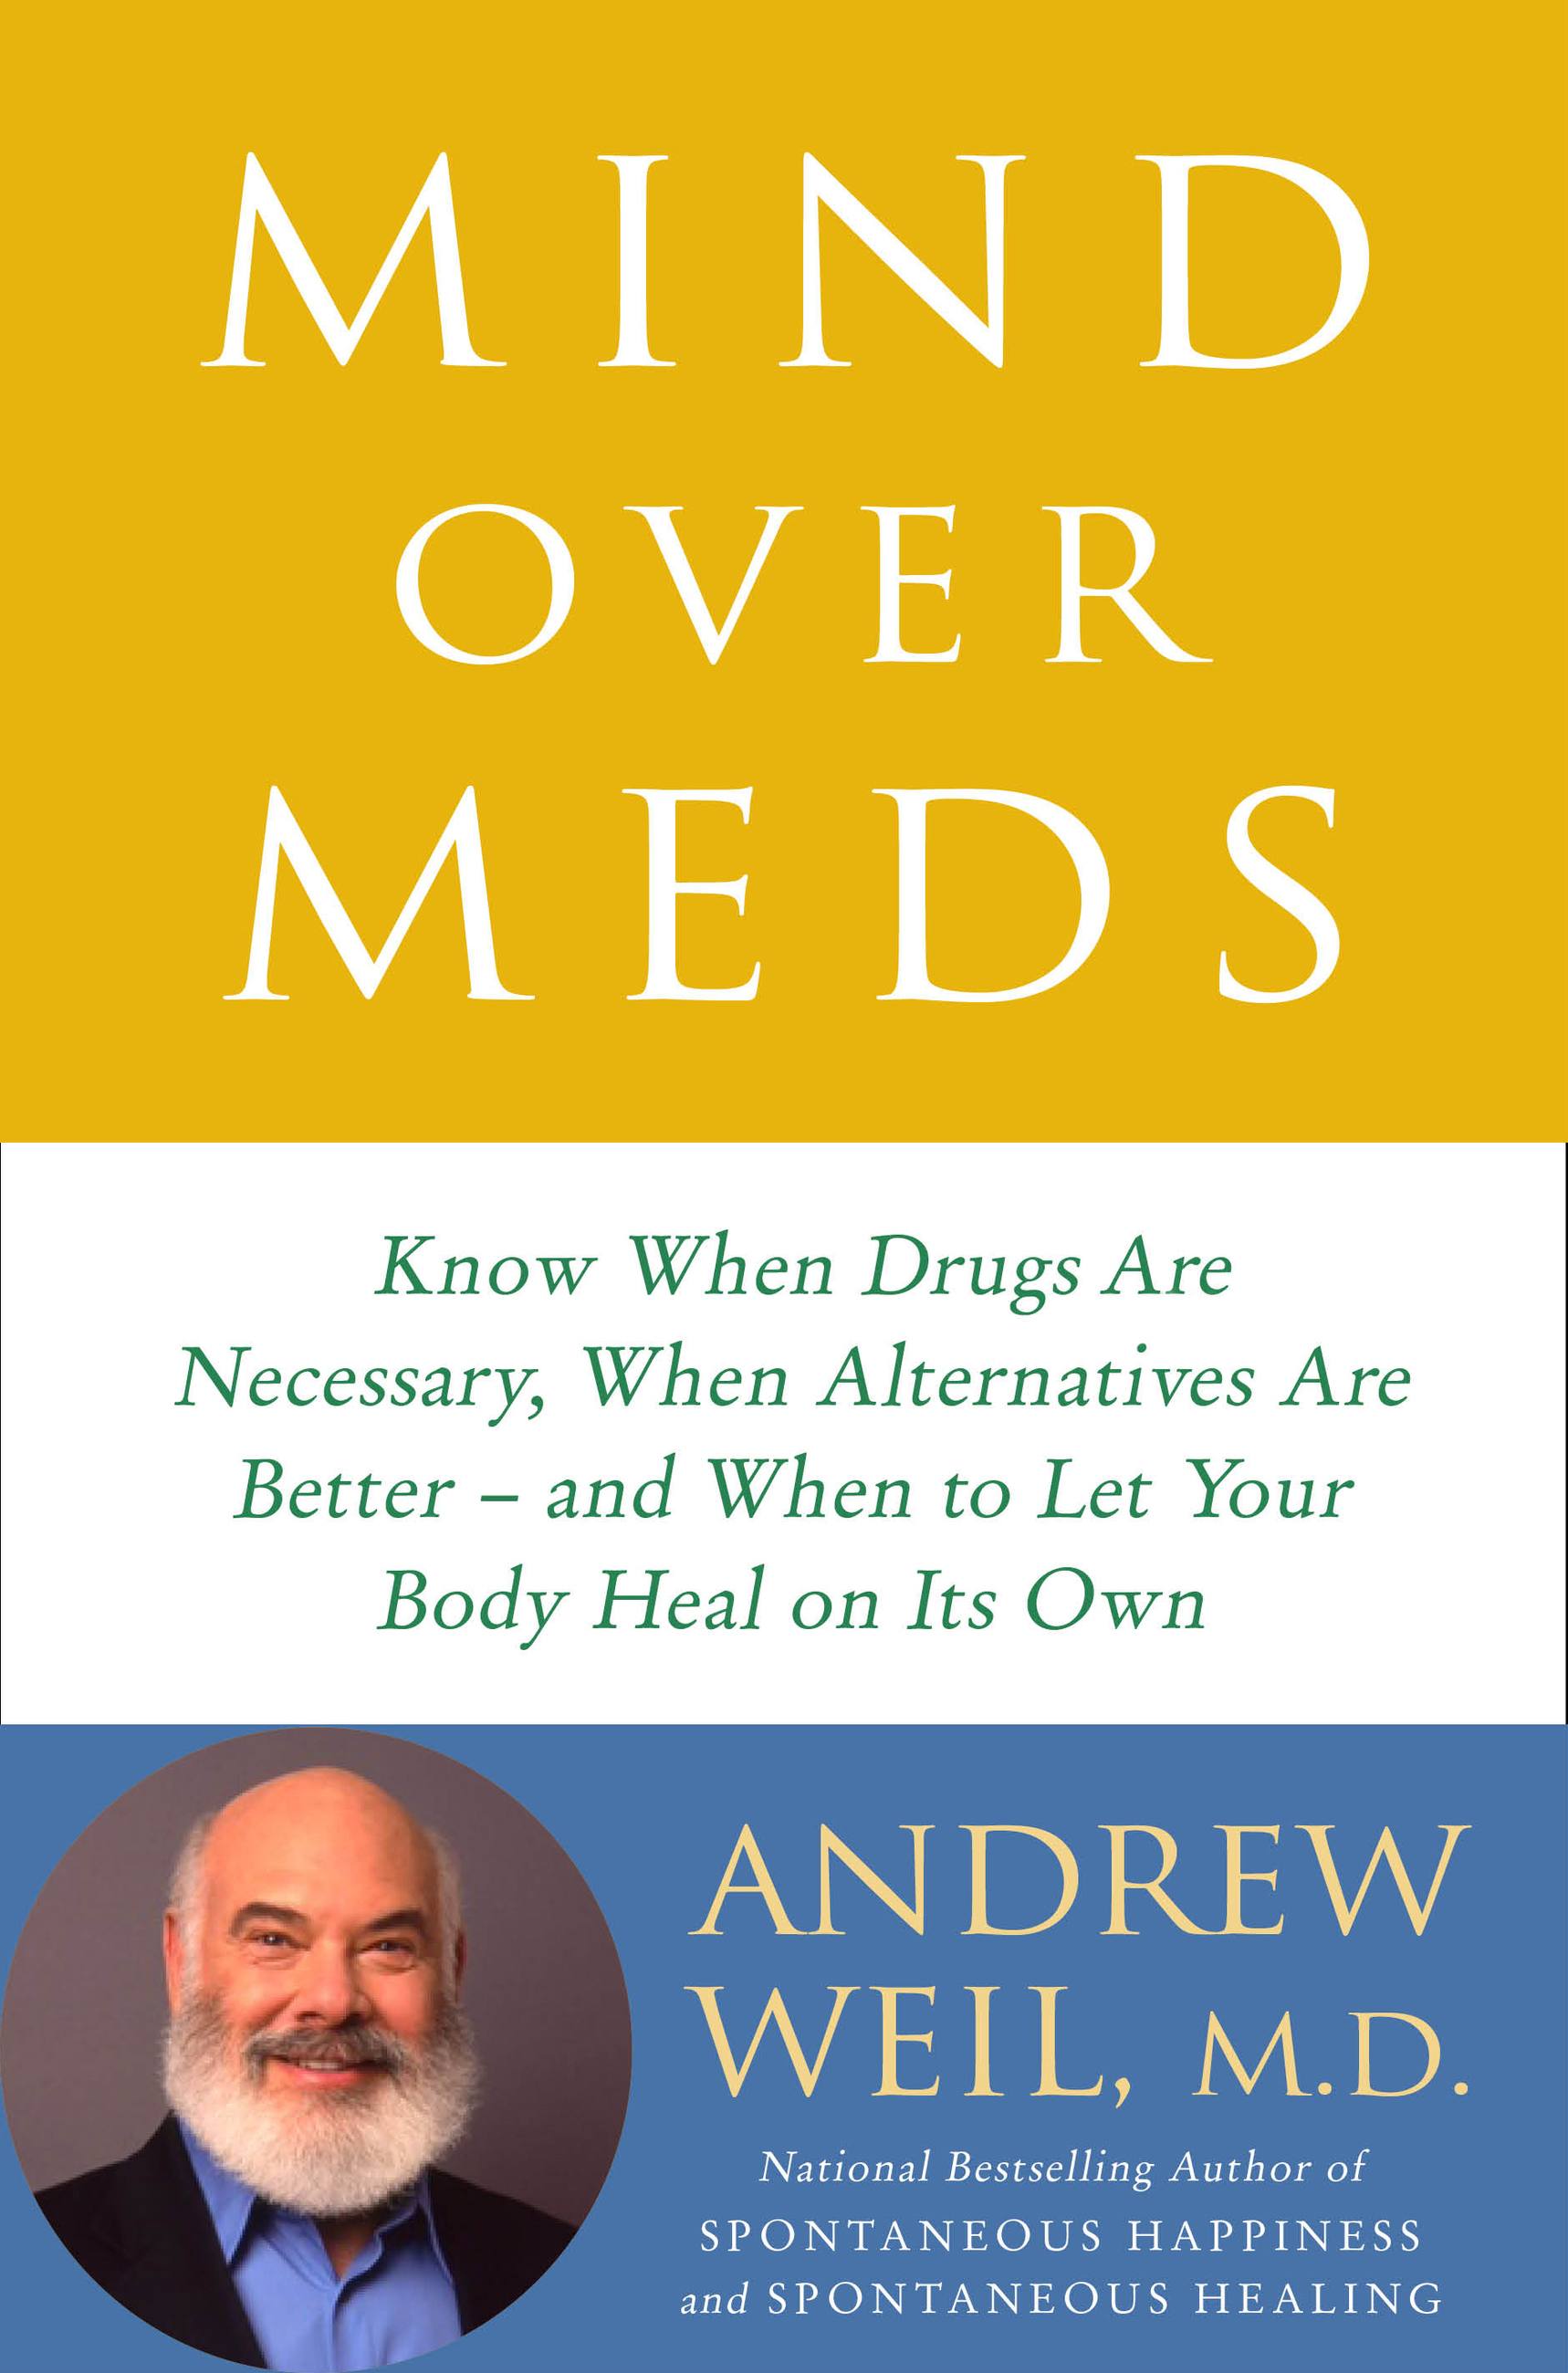 Mind Over Meds by Andrew Weil, MD | Hachette Book Group